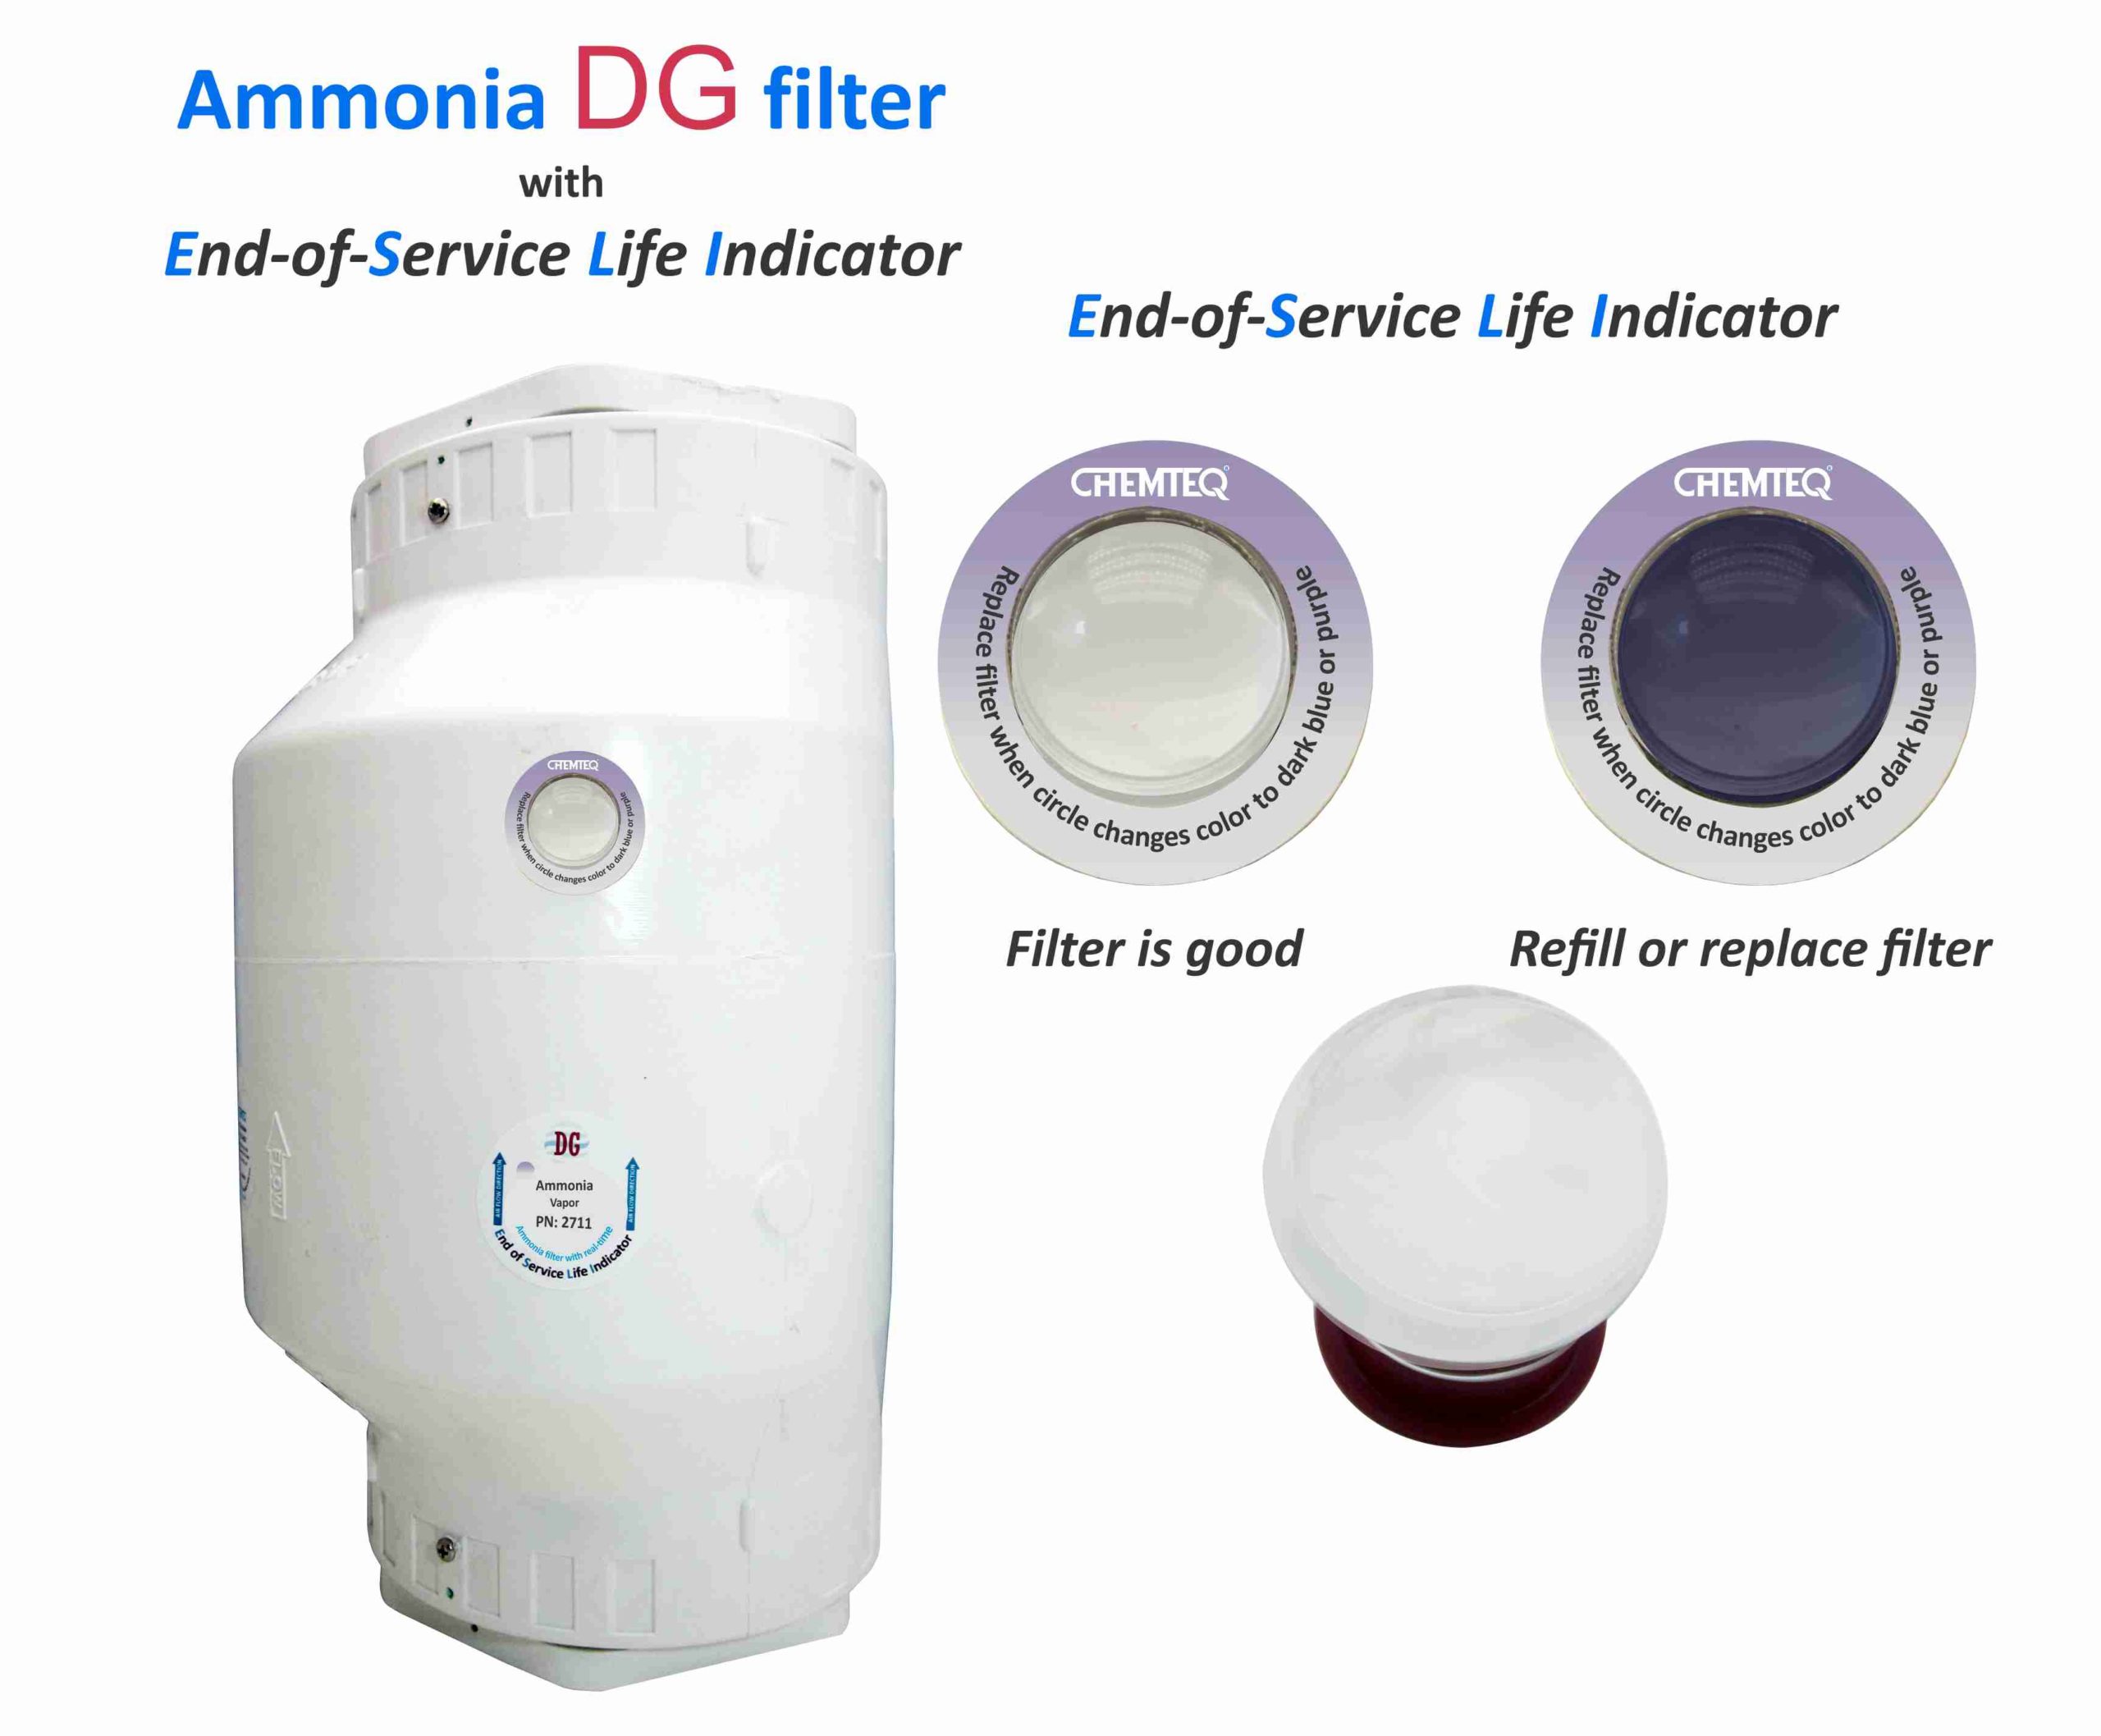 Ammonia DG FILTER-ESLI 2711. Ammonia filter with end-of-service life indicator suitable for chemical Processes and Reactors Vents